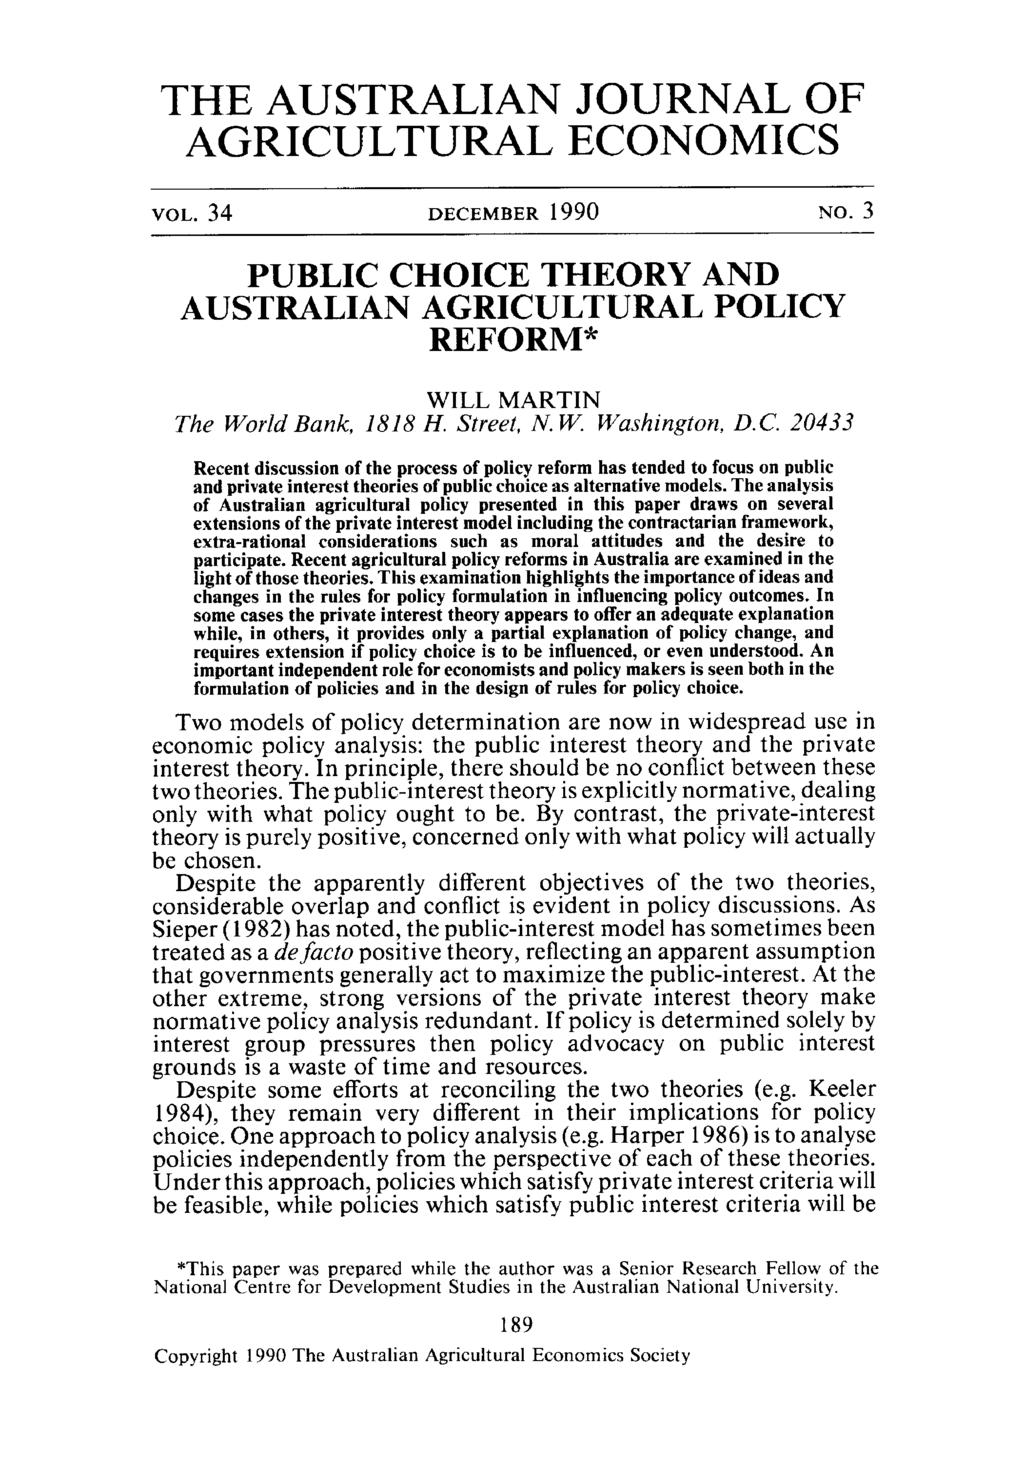 THE AUSTRALIAN JOURNAL OF AGRICULTURAL ECONOMICS VOL. 34 DECEMBER 1990 NO. 3 PUBLIC CHOICE THEORY AND AUSTRALIAN AGRICULTURAL POLICY REFORM* WILL MARTIN The World Bank, 1818 H. Street, N. W. Washington, D.